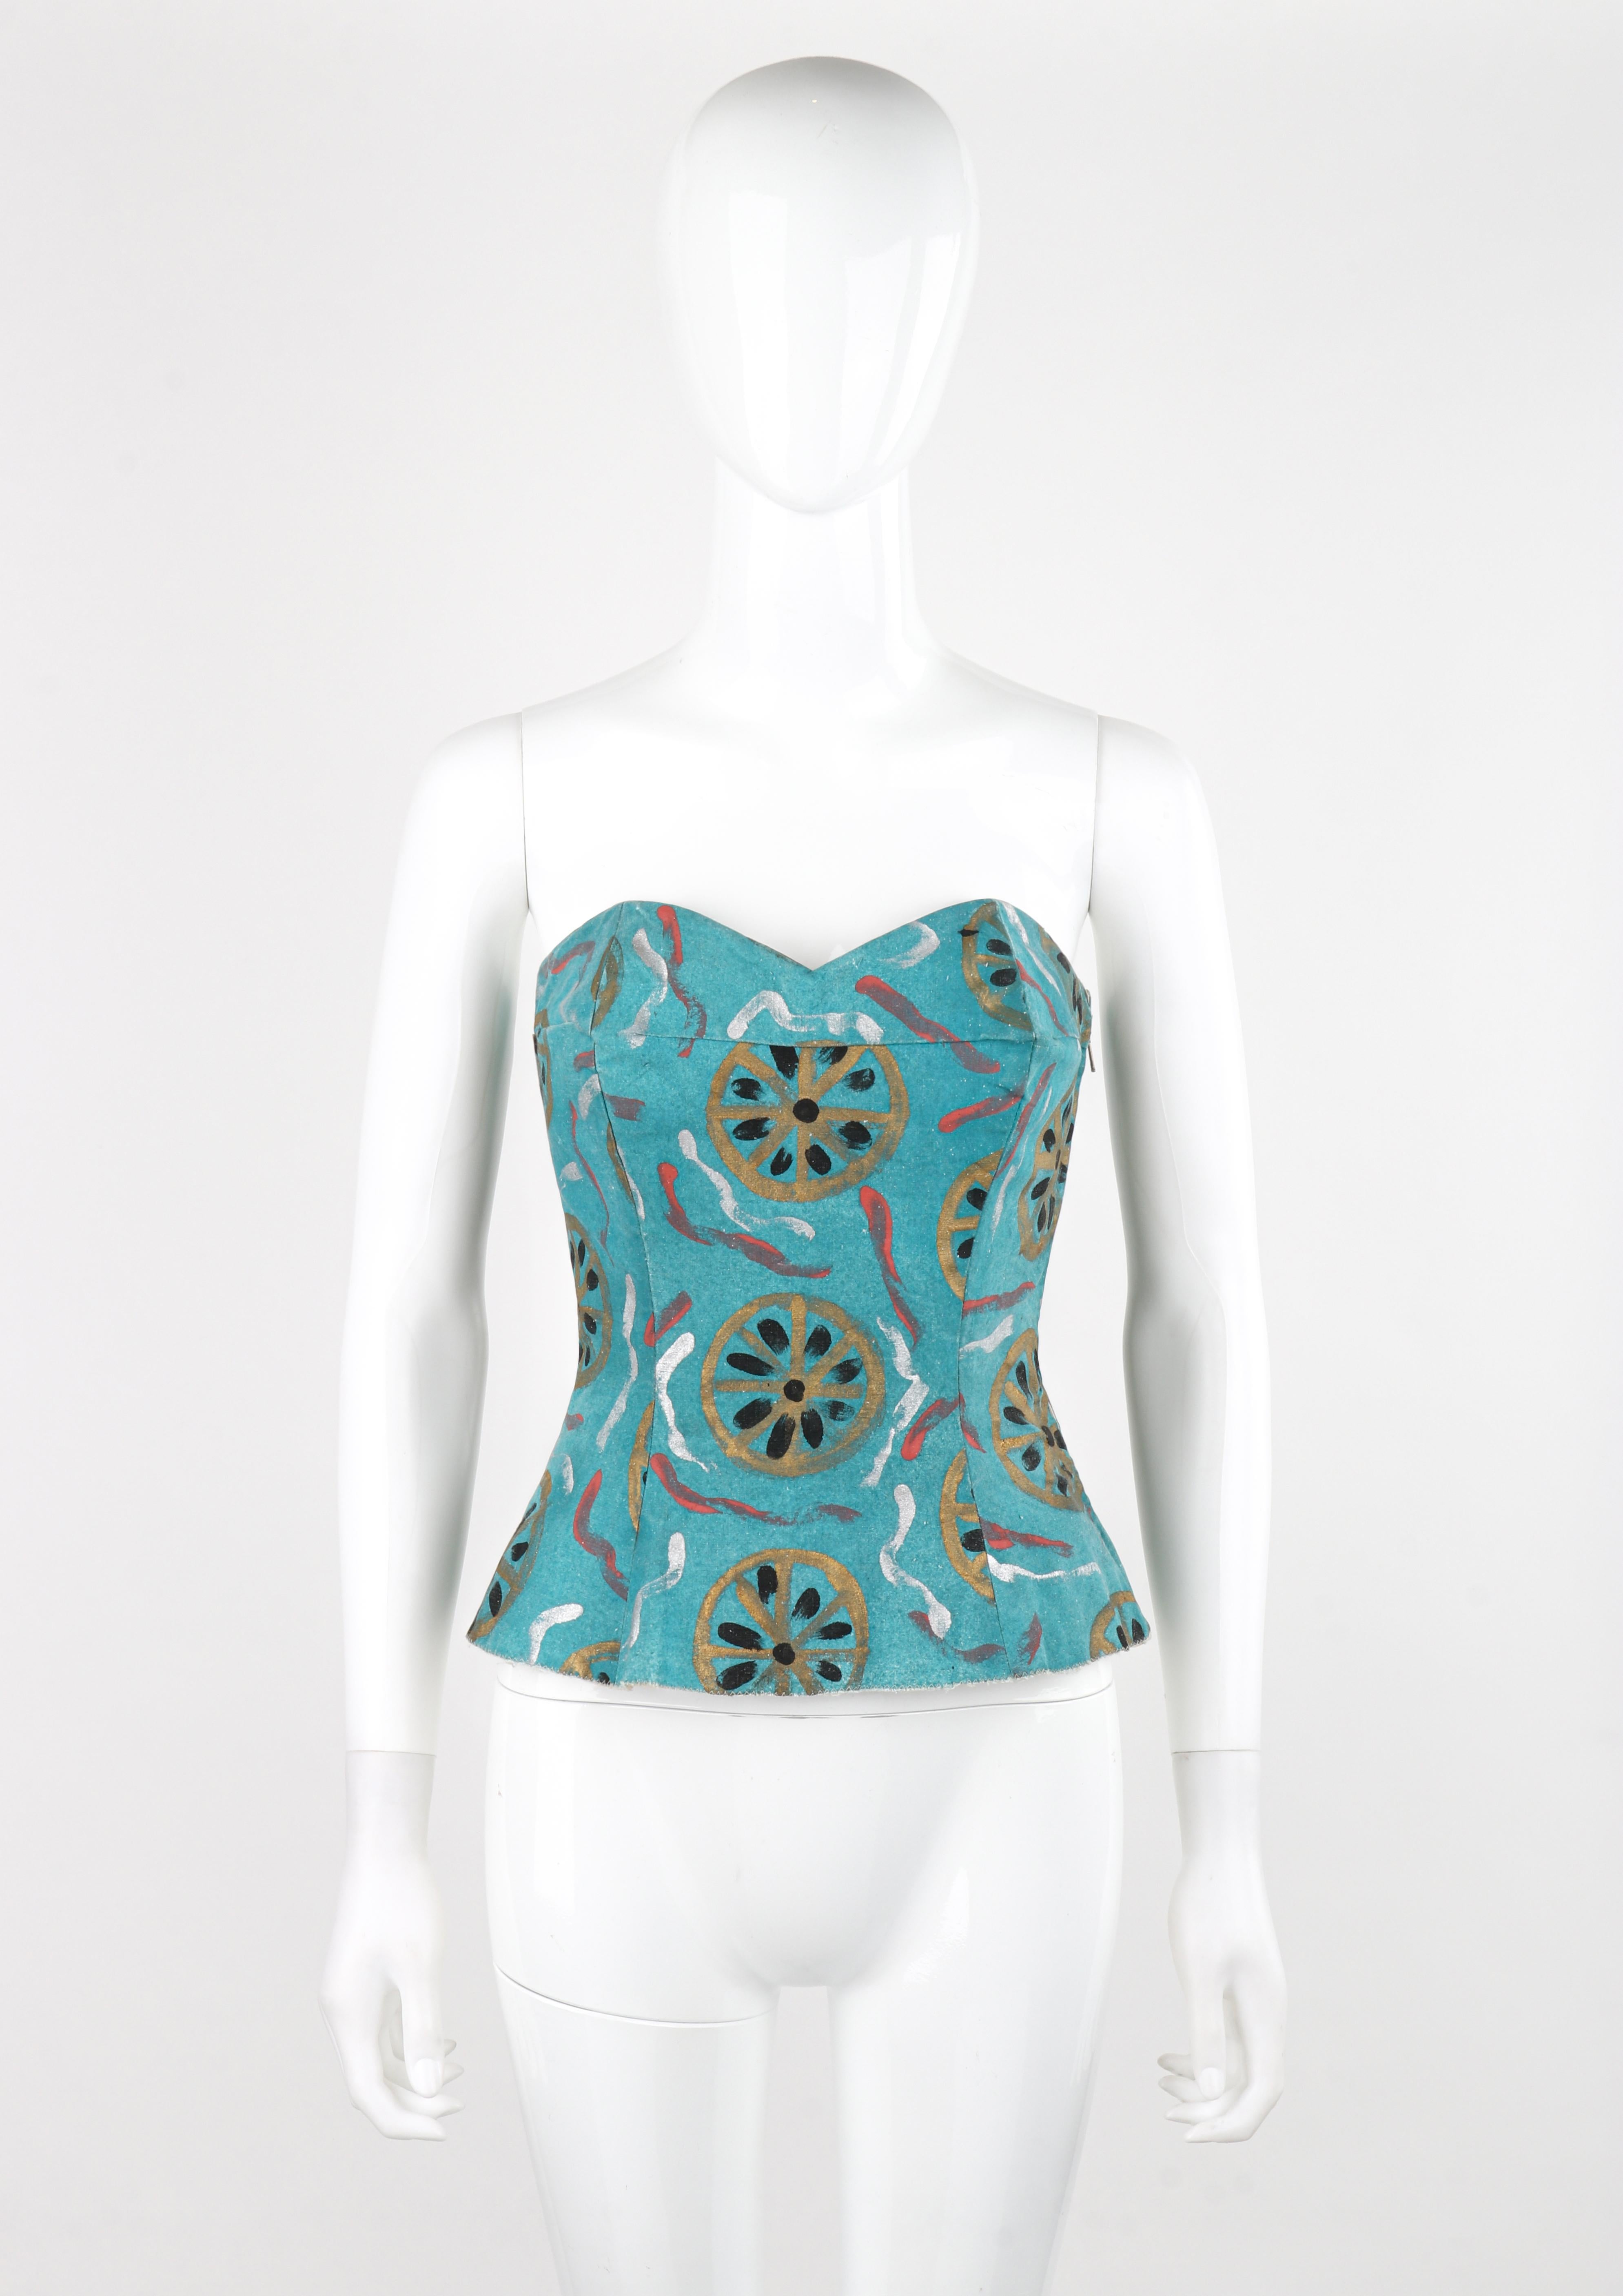 EMILIO PUCCI c.1954 Blue Cotton Fitted Hand Painted Bustier Sun Top RARE & Documented

Brand / Manufacturer: Emilio Pucci
Circa: 1954
Designer: Emilio Pucci
Style: Bustier Top
Color(s): Shades of Teal, White, Gold, Silver, Black, Red
Lined: